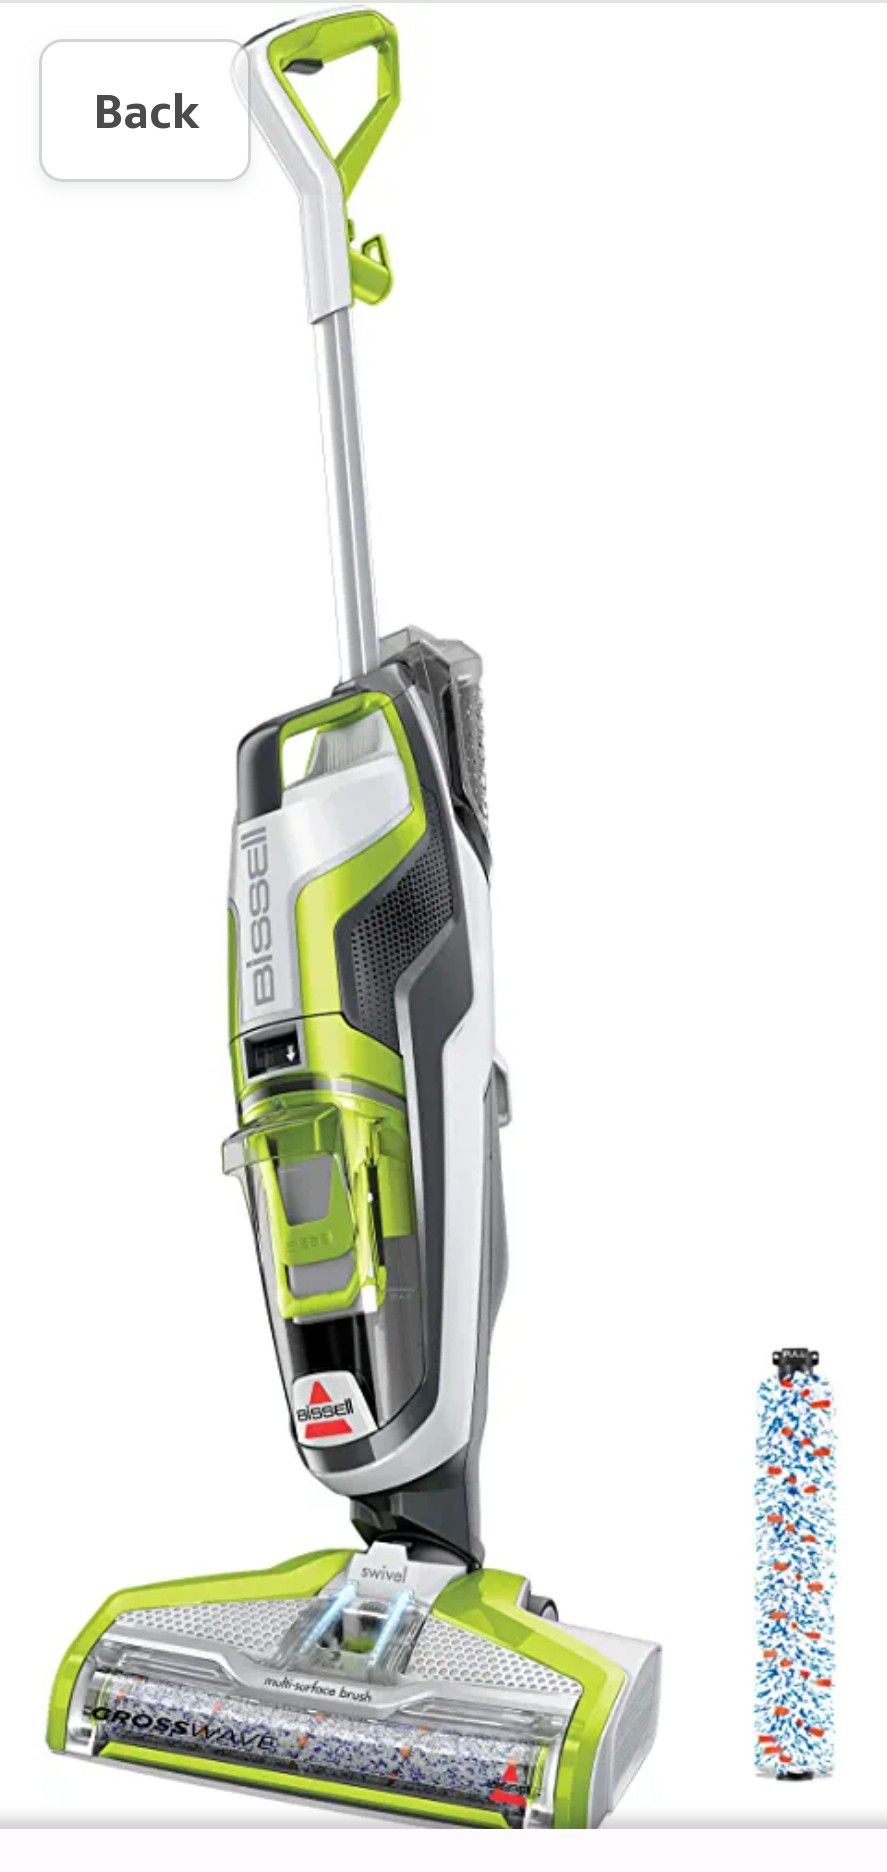 Bissell 1785 A Cross Wave All-in-One Multi-Surface Cleaner, Corded

